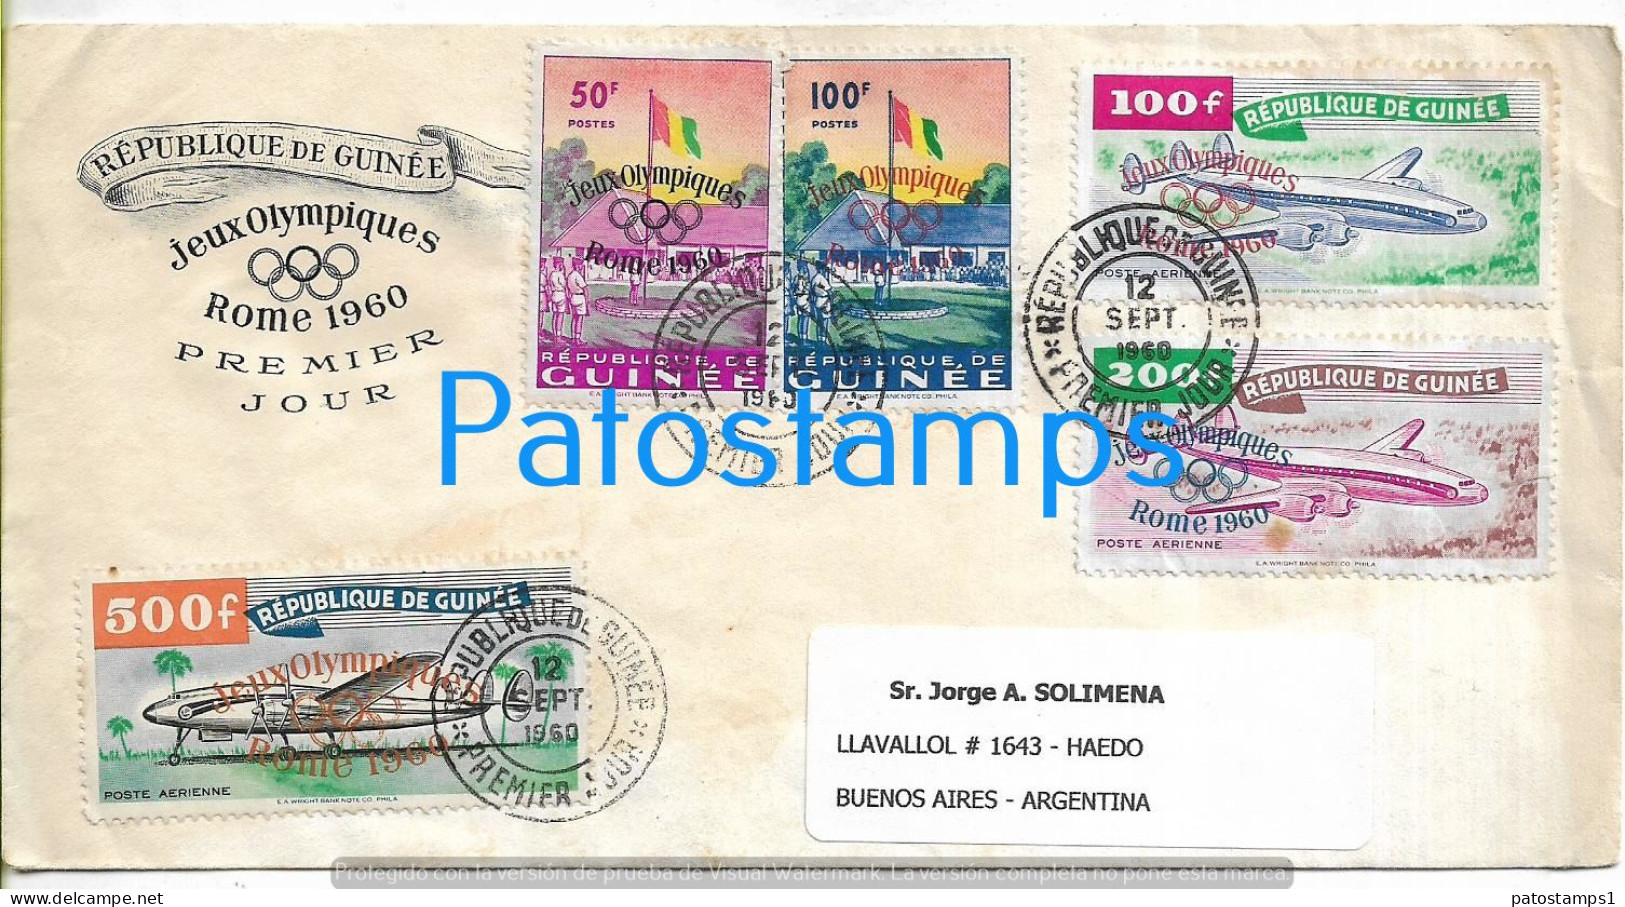 226331 AFRICA REPUBLIC GUINEE COVER CANCEL YEAR 1960 OLYMPIC GAMES CIRCULATED TO ARGENTINA NO POSTCARD - Otros - África